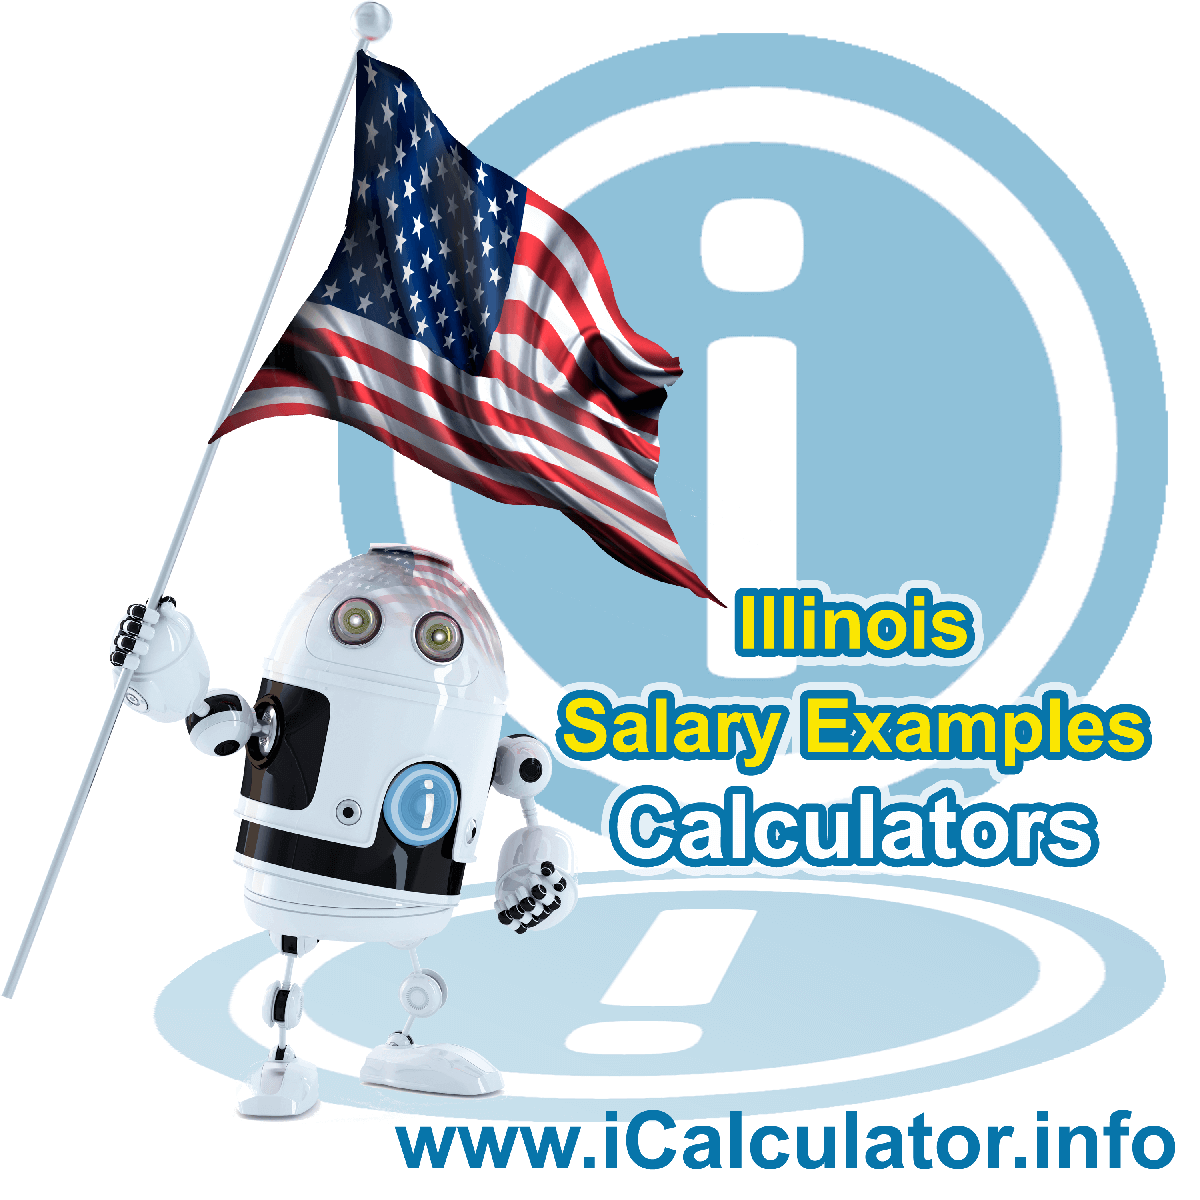 Illinois Salary Example for $ 130,000.00 in 2023 | iCalculator™ | $ 130,000.00 salary example for employee and employer paying Illinois State tincome taxes. Detailed salary after tax calculation including Illinois State Tax, Federal State Tax, Medicare Deductions, Social Security, Capital Gains and other income tax and salary deductions complete with supporting Illinois state tax tables 